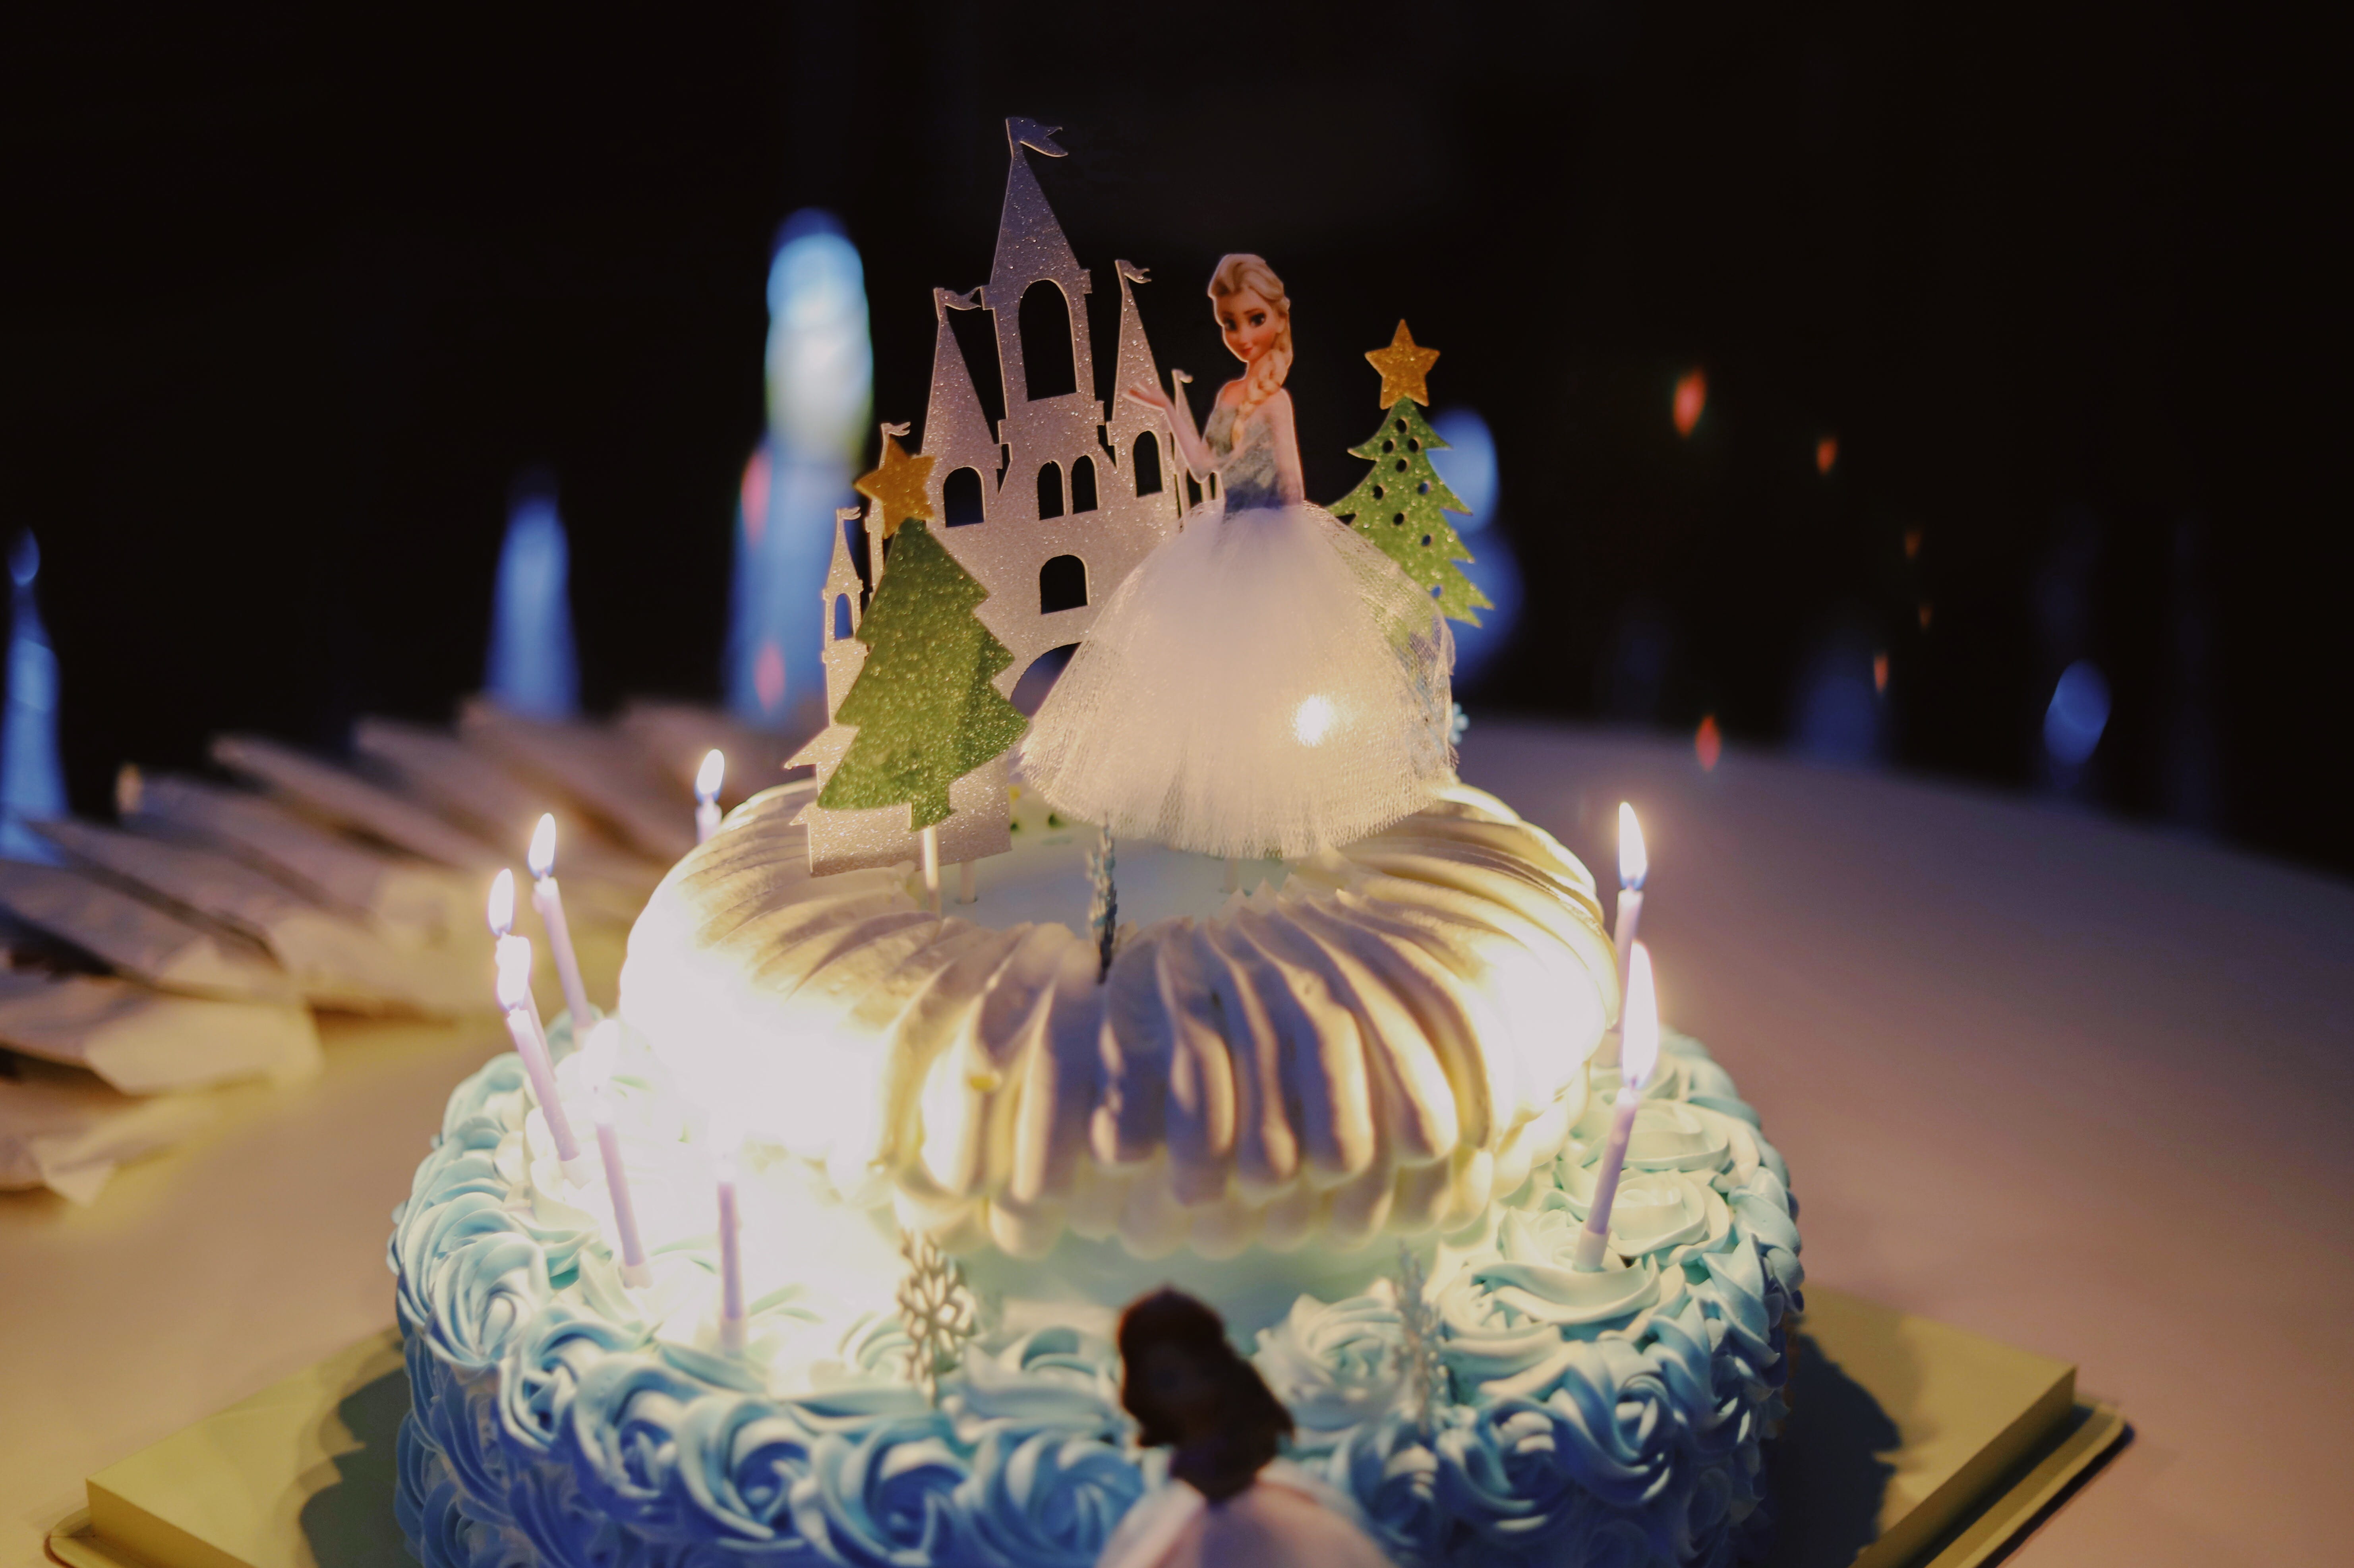 2-layer cake with lighted candles and Disney Frozen Queen Elsa cake topper, Disney Frozen Queen Elsa fondant cake